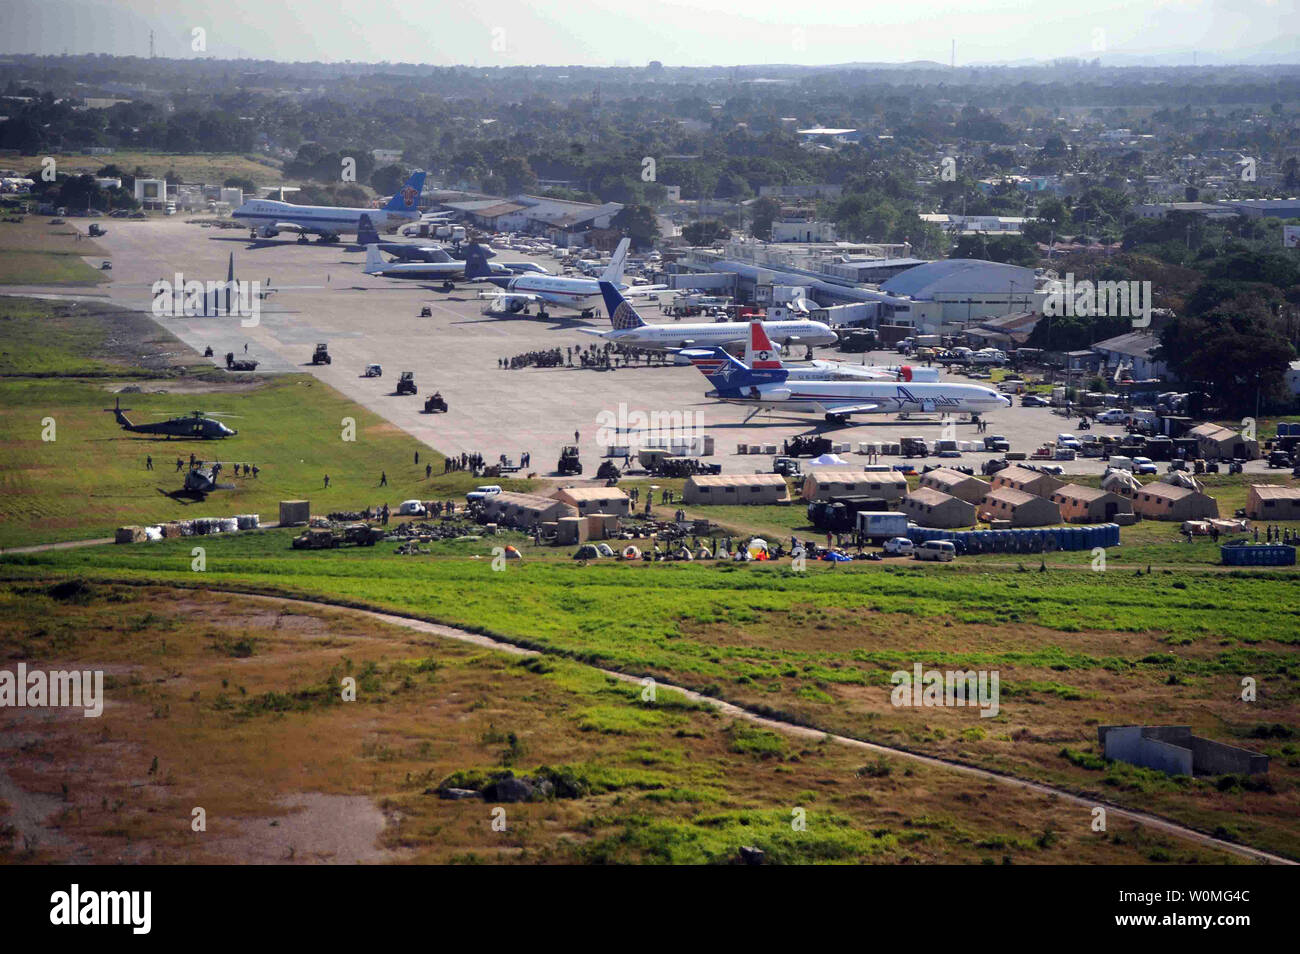 Airplanes wait for off-load to support in earthquake relief efforts at the Port-au-Prince International Airport in Haiti on January 17, 2010. Part-au-Prince was hit by a devastating 7.0 magnitude earthquake on Jan. 12, 2010.  UPI/Justin Stumberg/US Navy Stock Photo